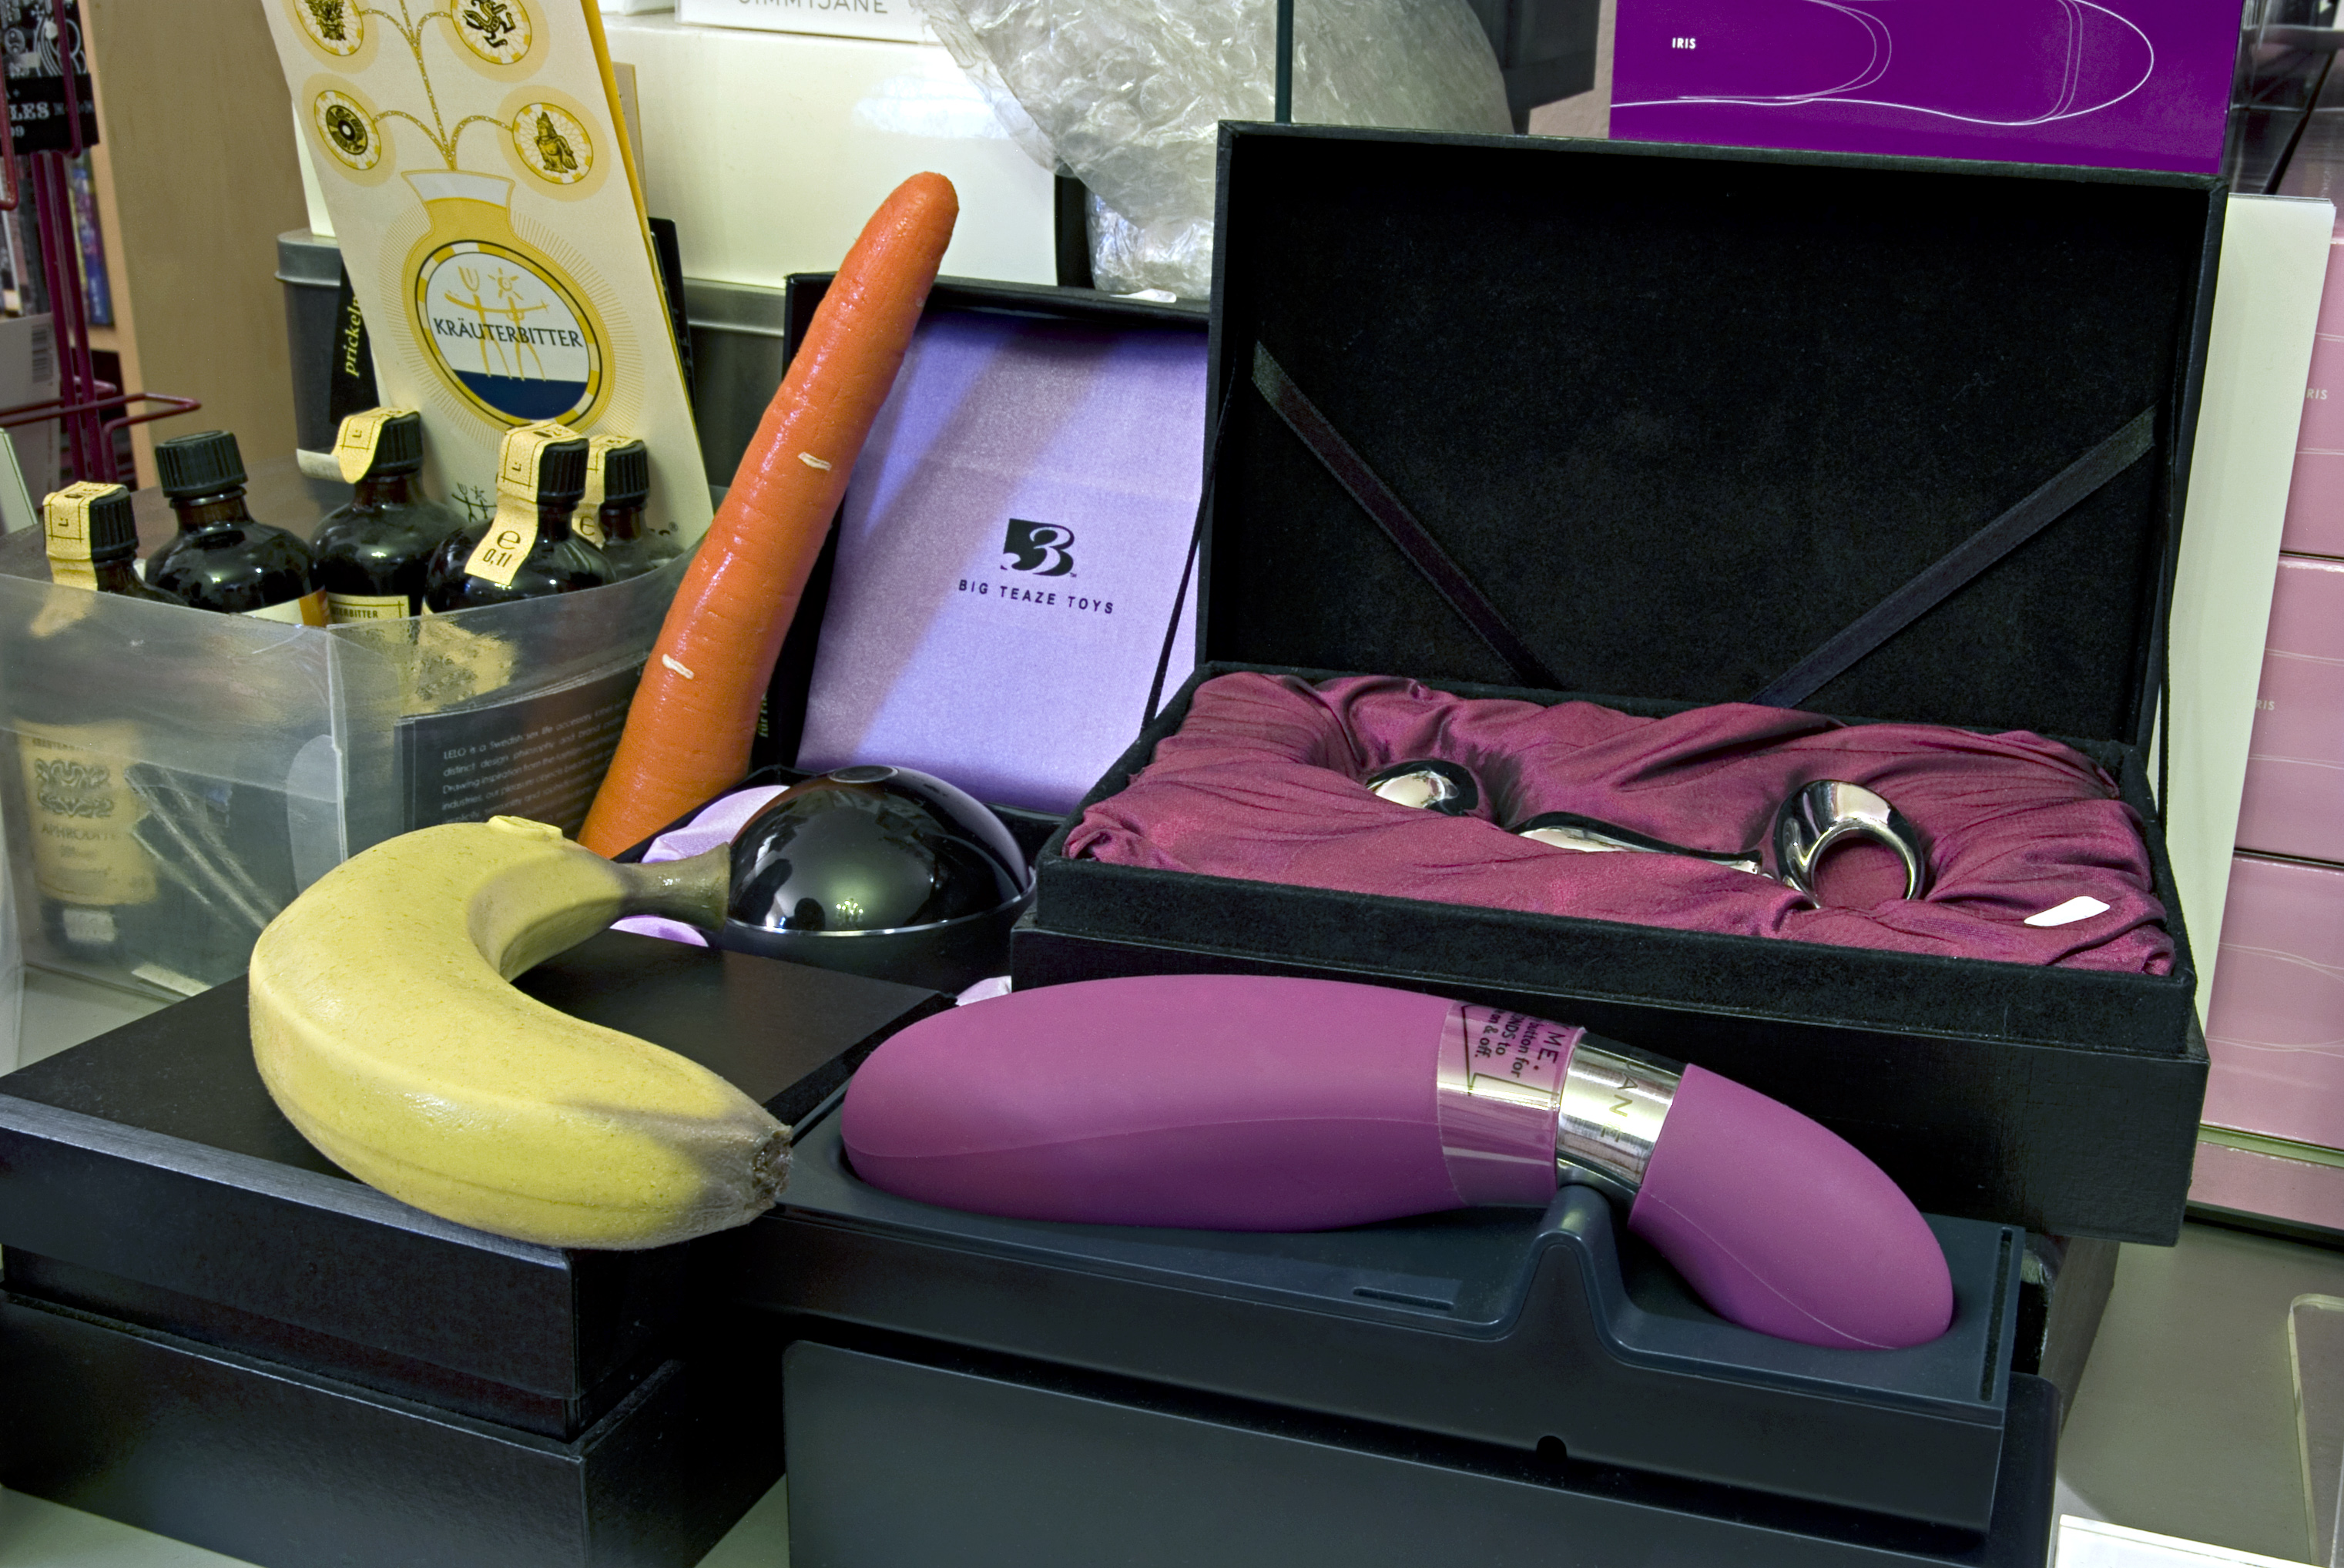 Anal toys equipment